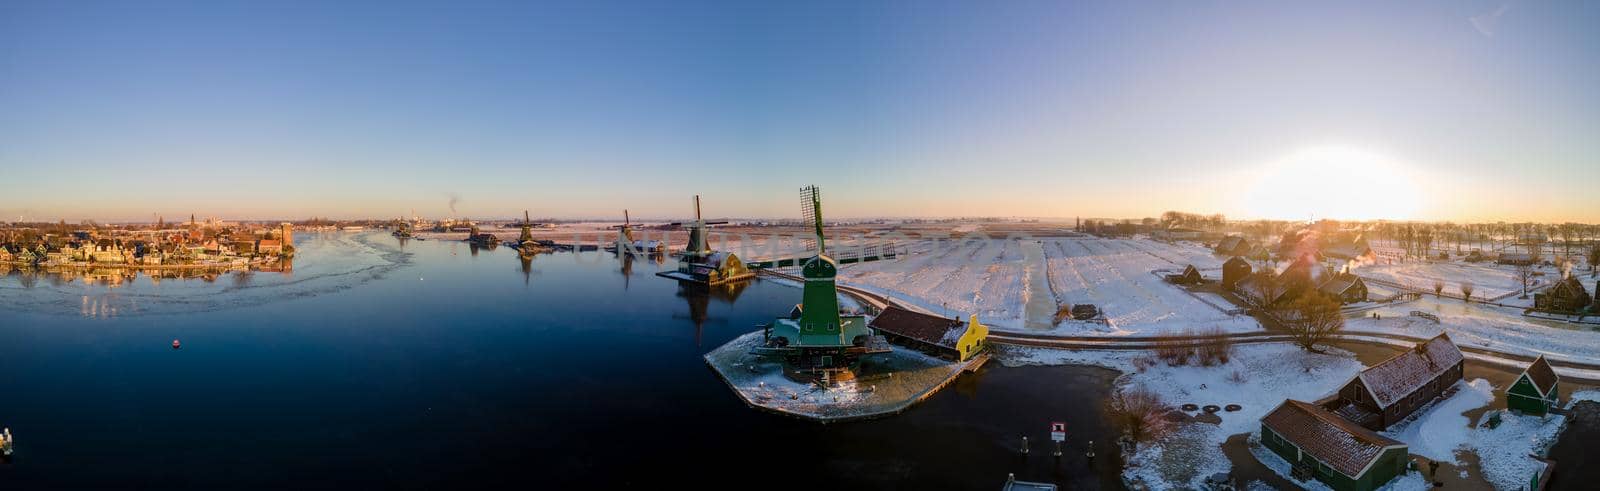 panoramic view over the Zaanse Schans windmill village snow covered during winter, Zaanse Schans wind mills historical wooden mills in the Netherlands by fokkebok